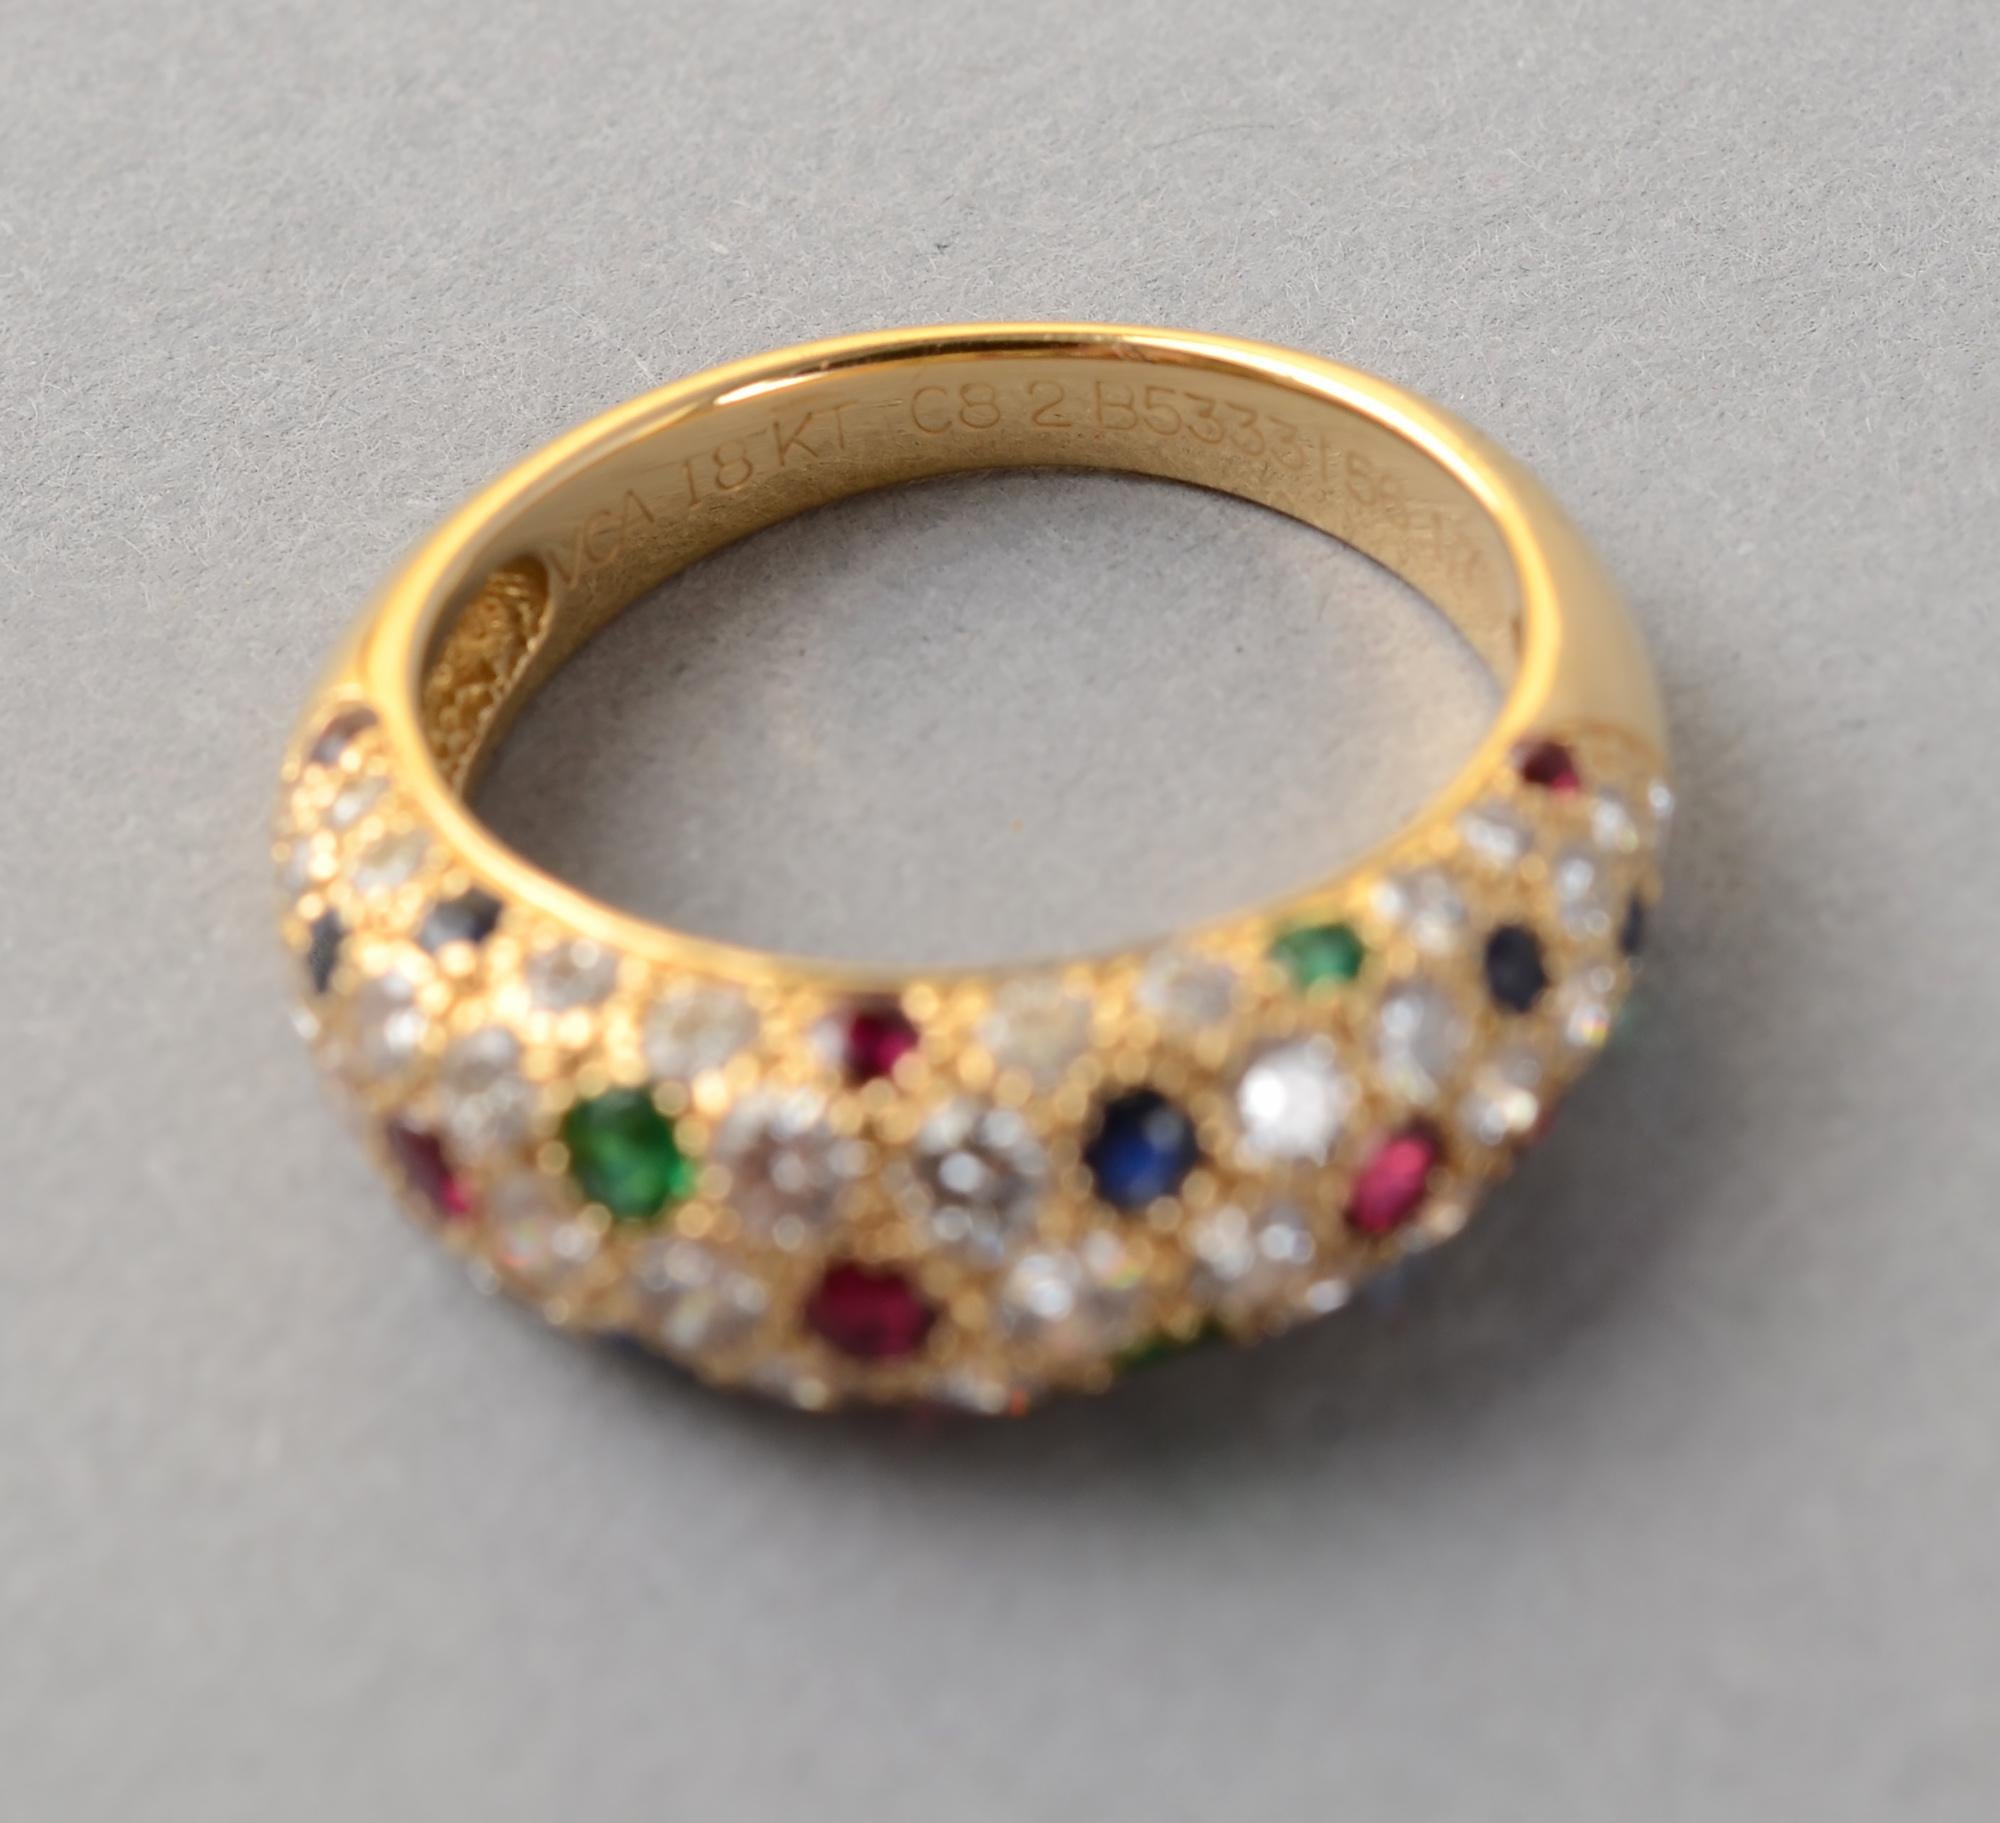 Modern Van Cleef & Arpels Diamond Cocktail Ring with Rubies, Sapphires and Emeralds